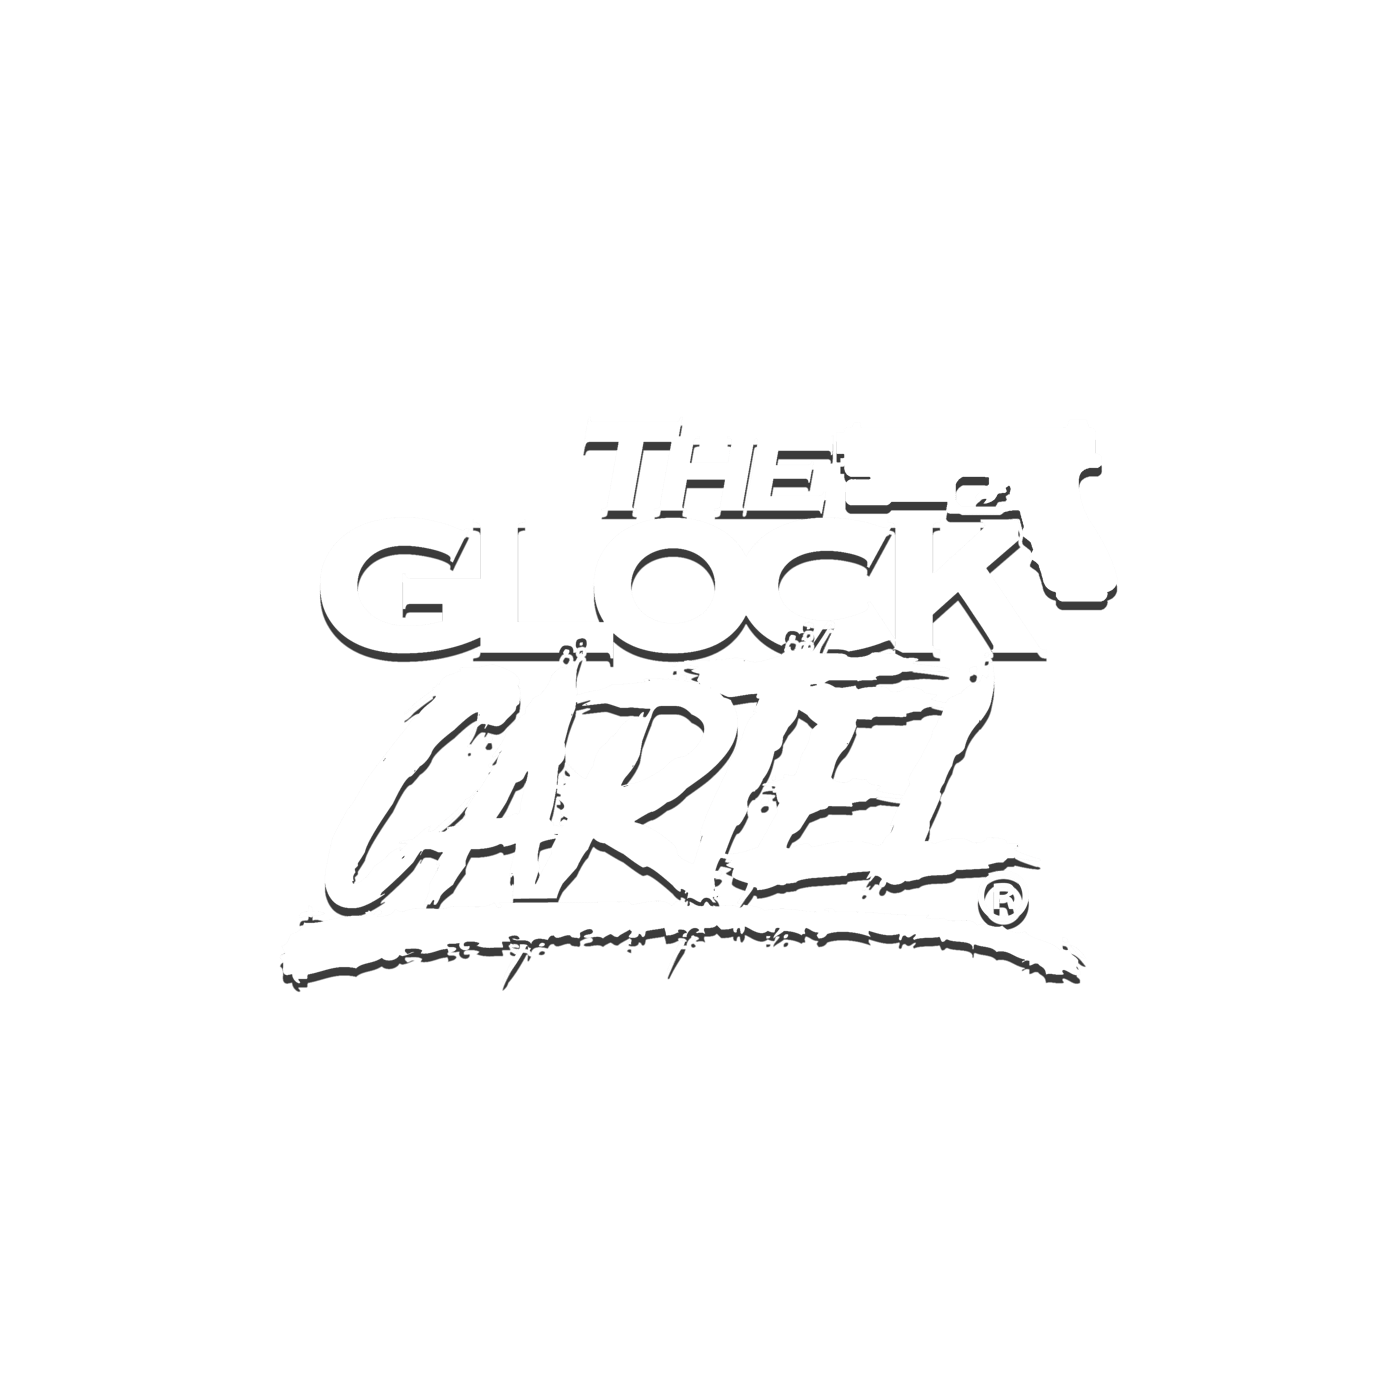 Welcome to The Glock Cartel